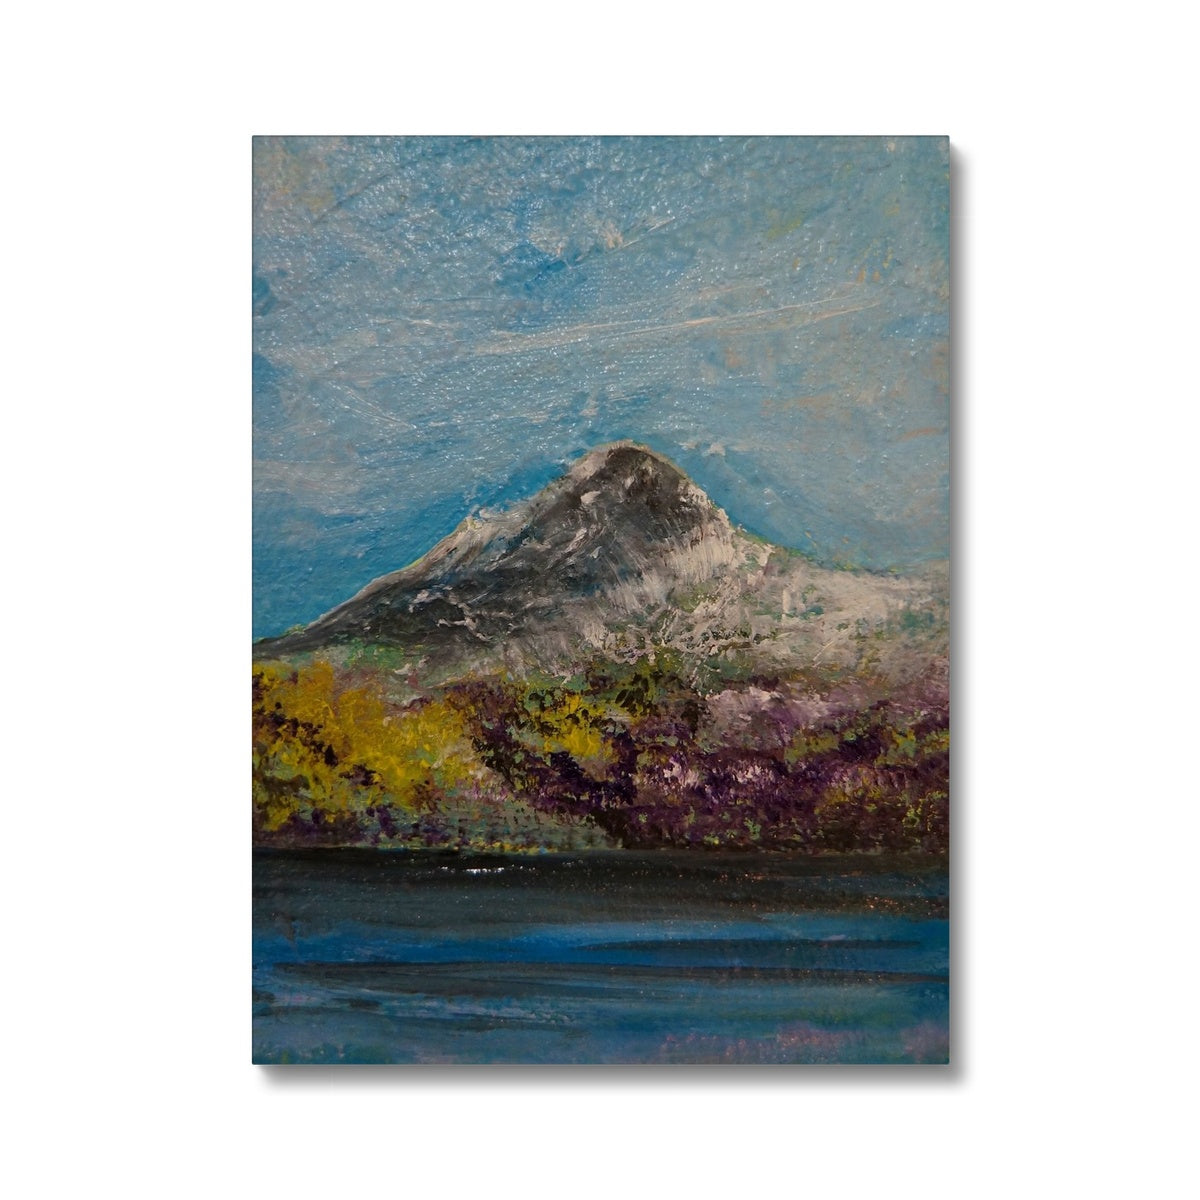 Ben Lomond ii Painting | Canvas From Scotland-Contemporary Stretched Canvas Prints-Scottish Lochs & Mountains Art Gallery-18"x24"-Paintings, Prints, Homeware, Art Gifts From Scotland By Scottish Artist Kevin Hunter